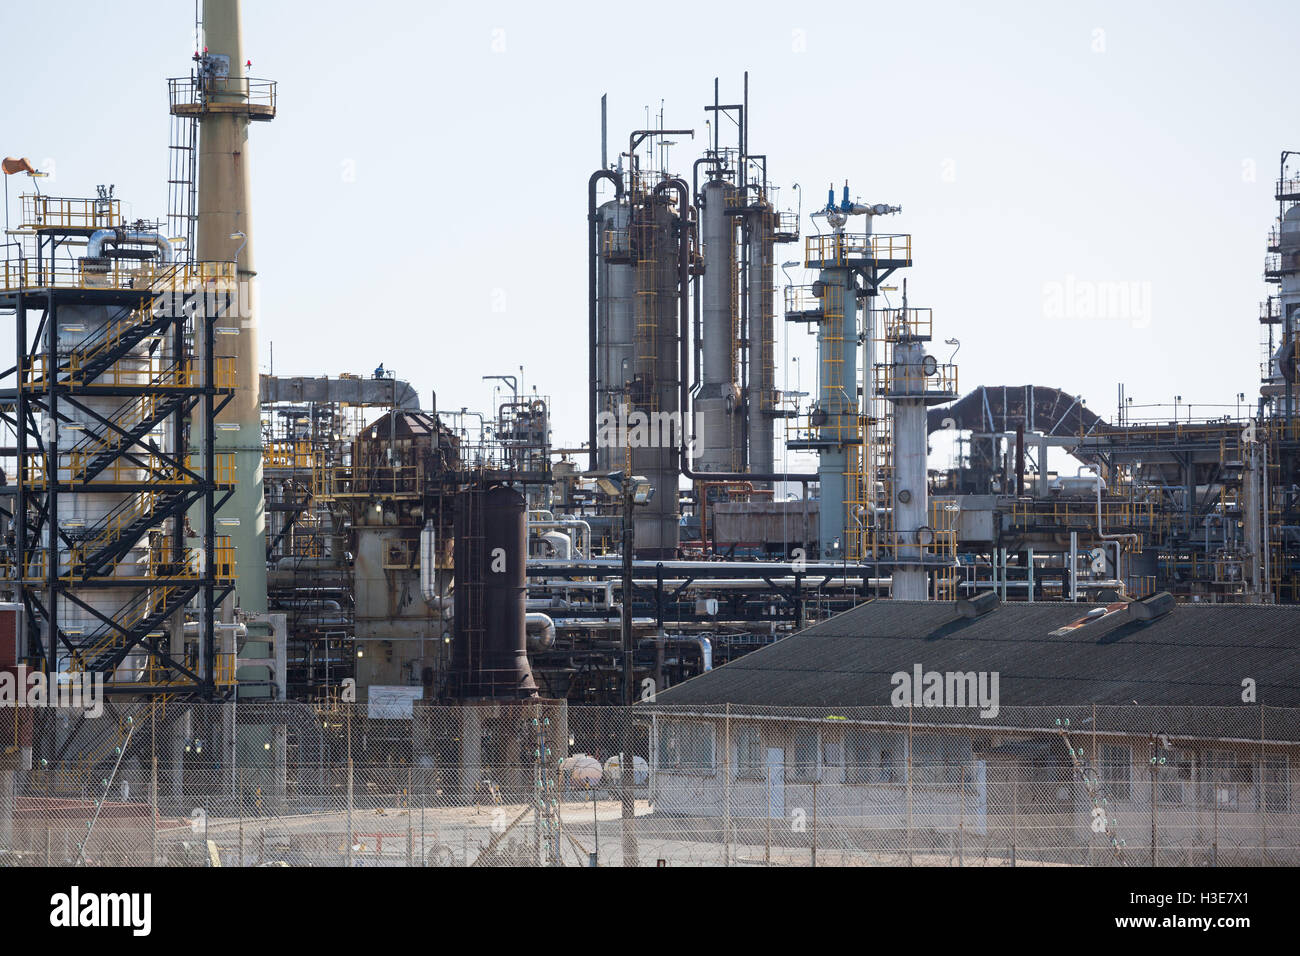 View of oil and gas industry Stock Photo